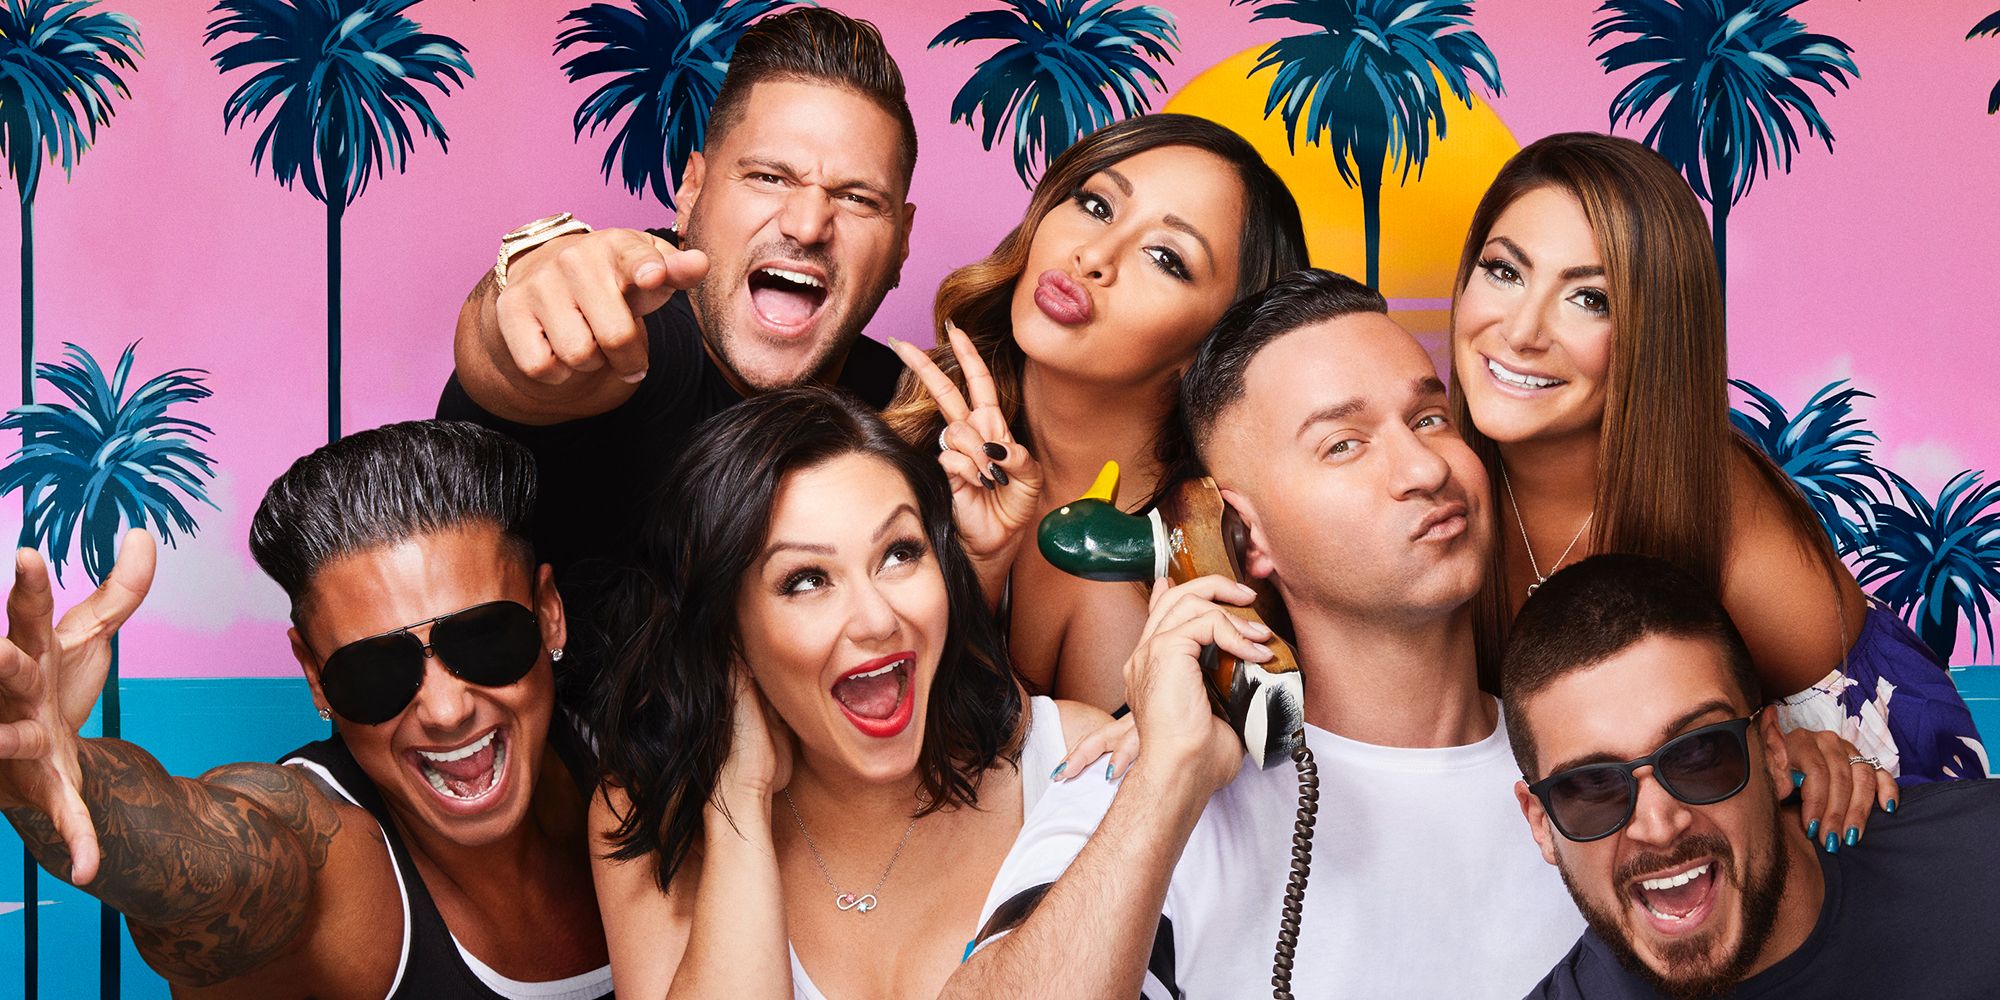 Is Jersey Shore: Family Vacation done?